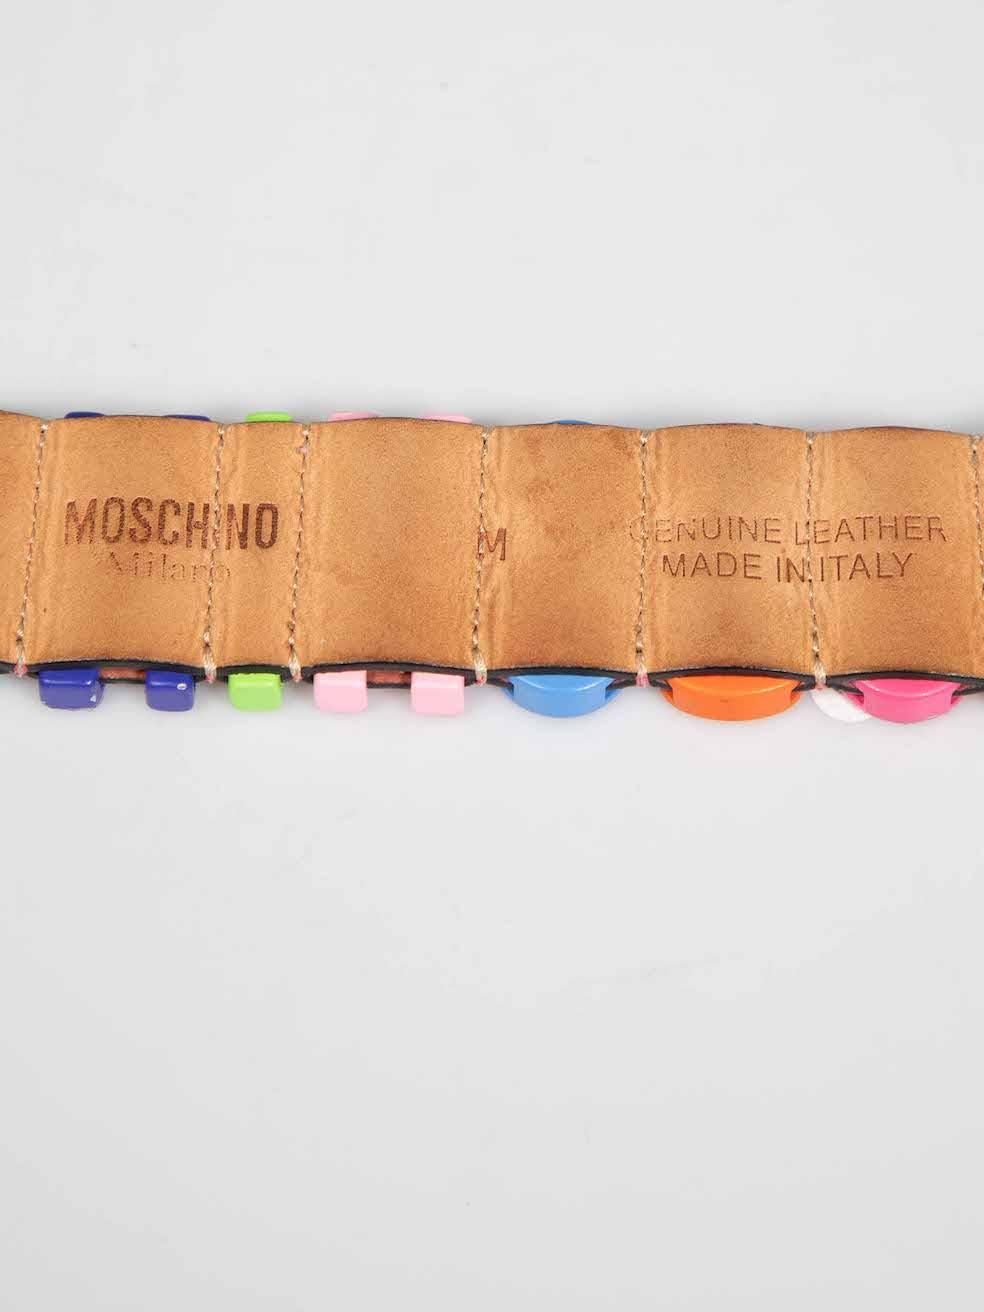 Moschino Logo Detail Leather Bracelet For Sale 1